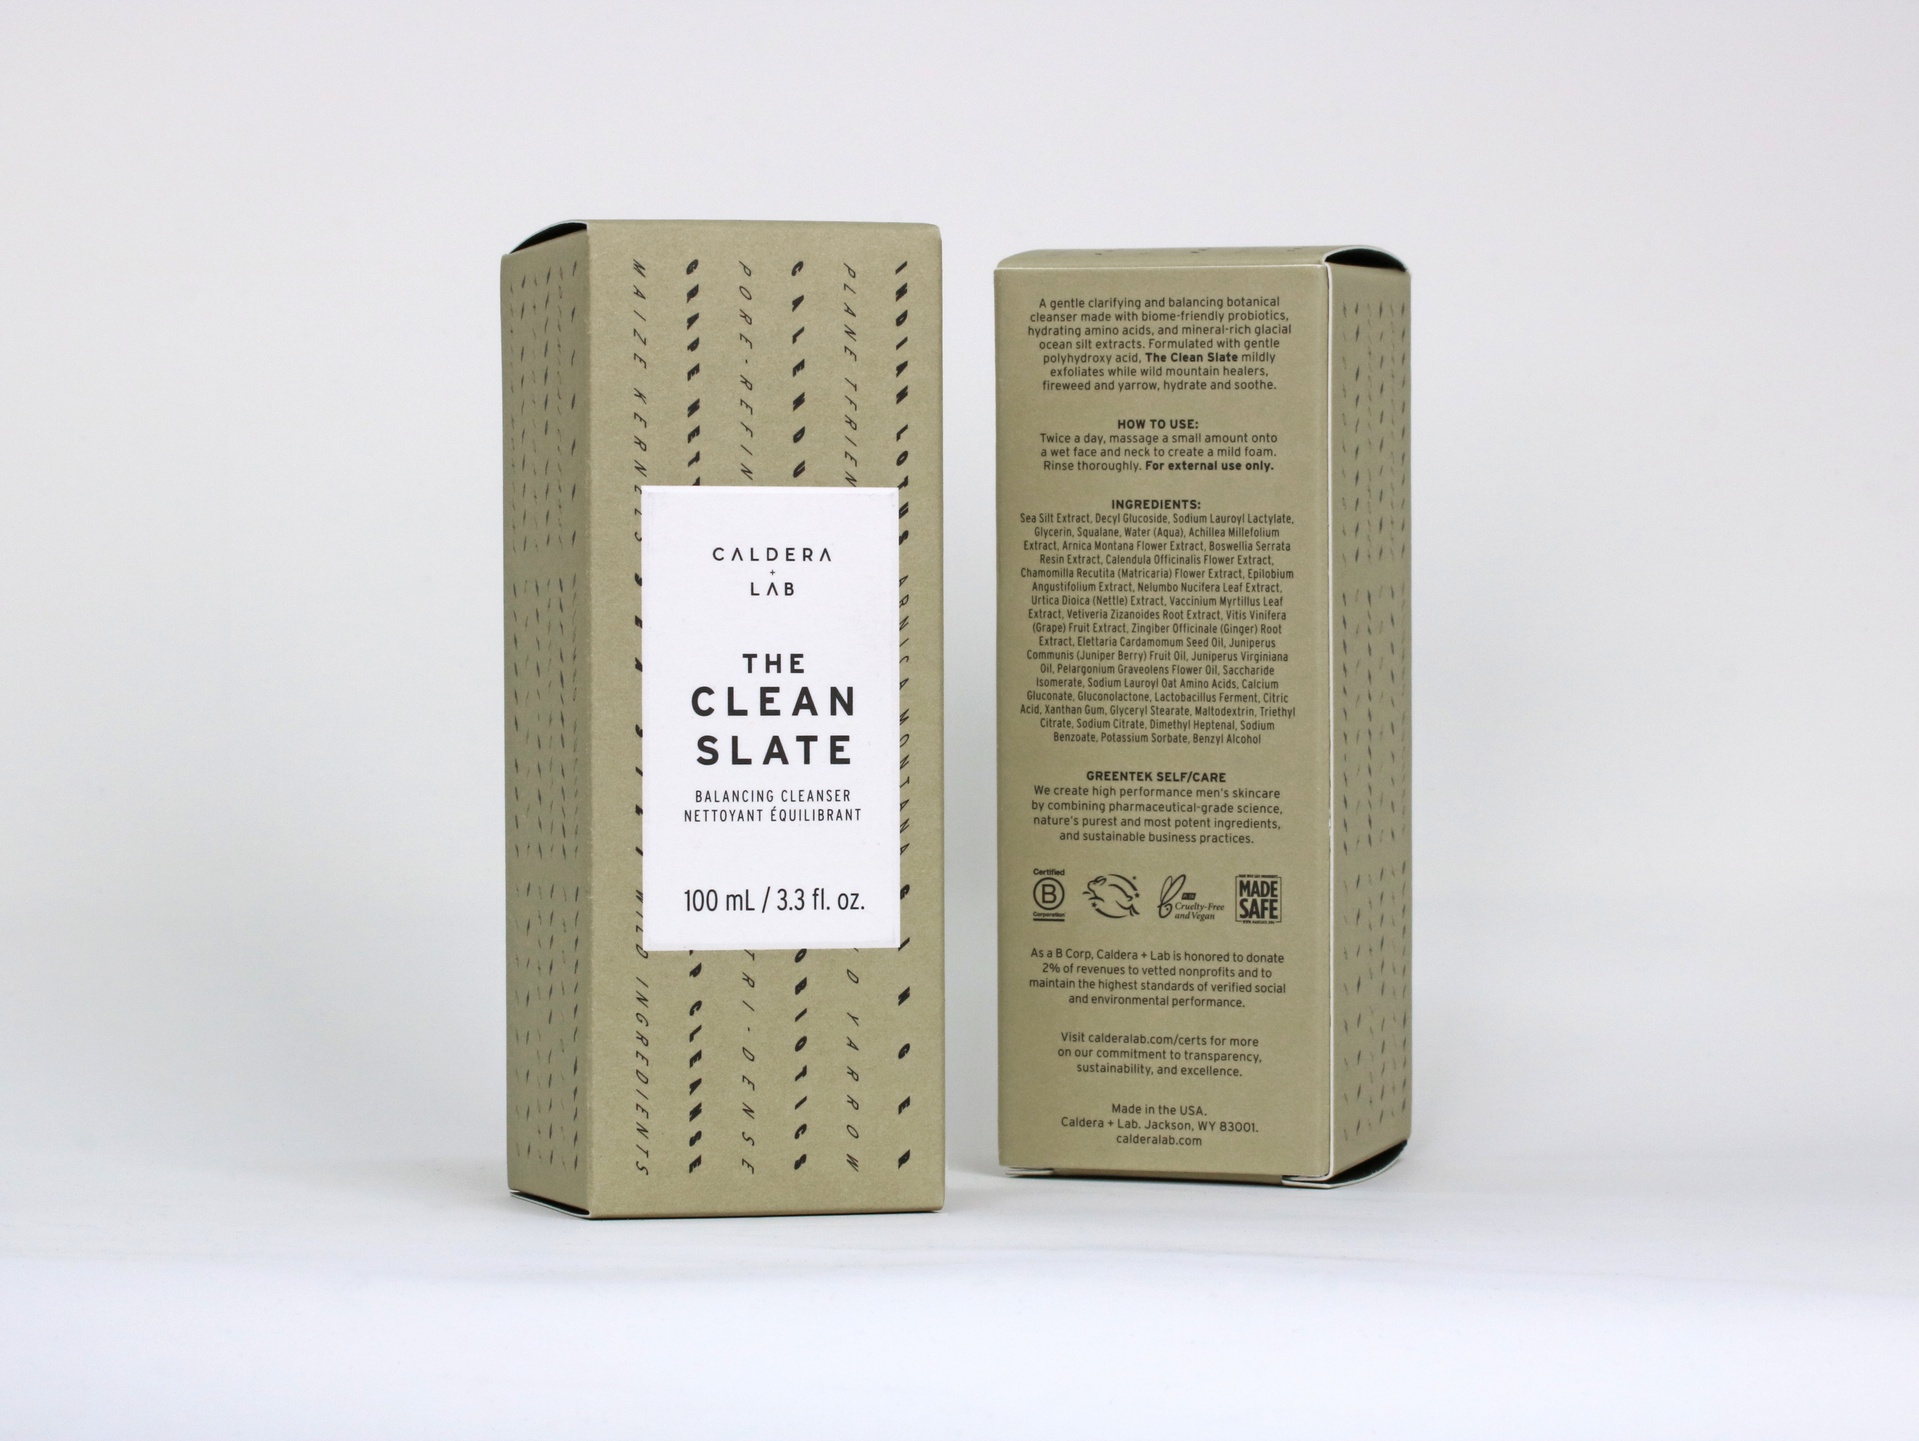 The Clean Slate folding cartons are made with 100% post-consumer recycled (PCR) fiber